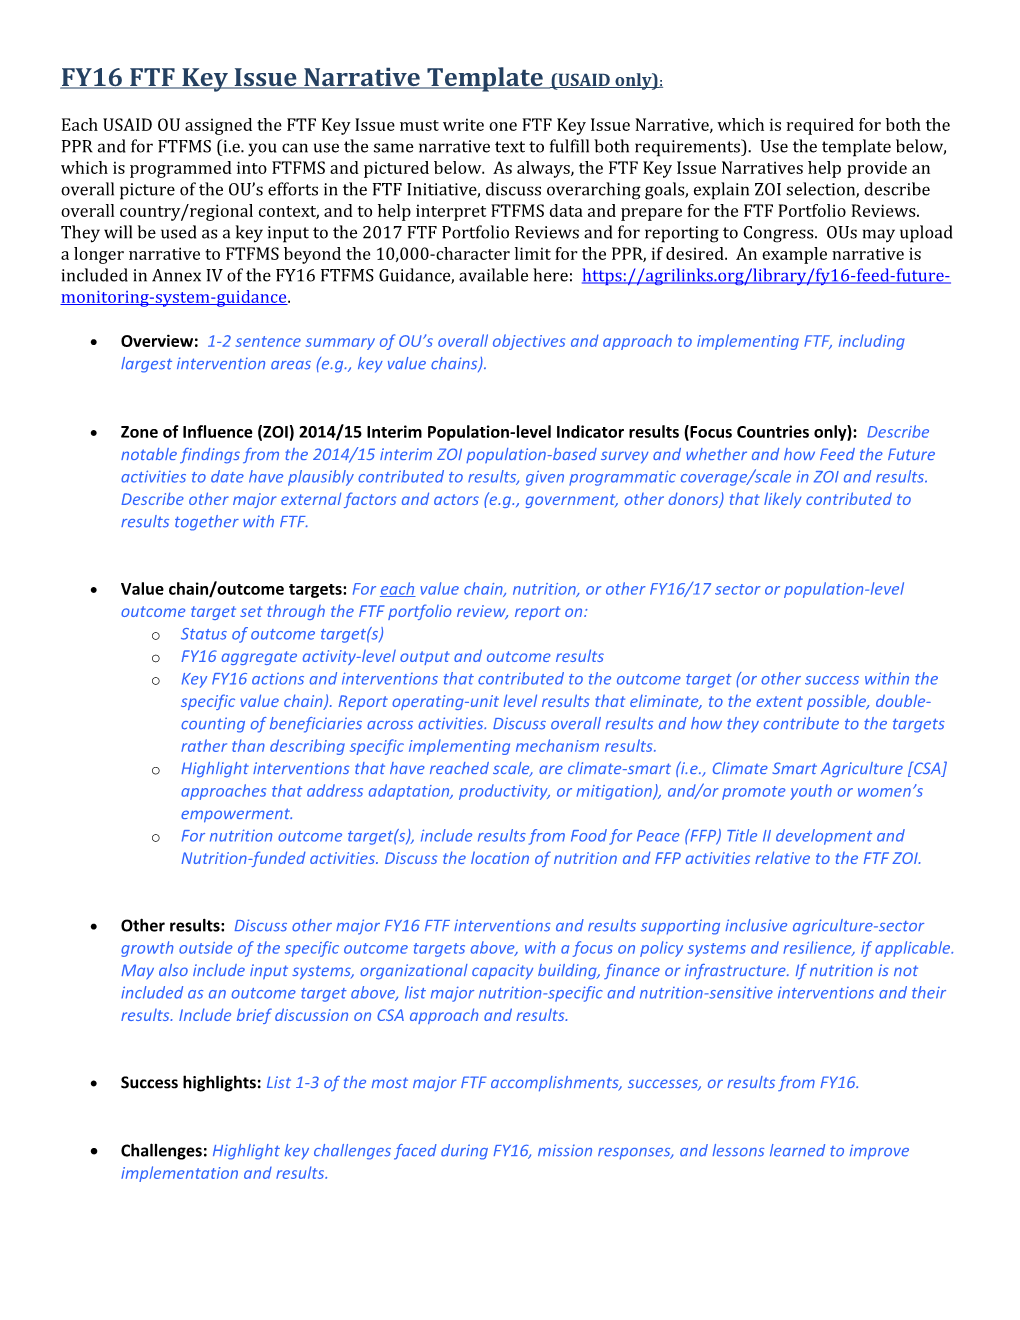 FY16FTF Key Issue Narrative Template (USAID Only)